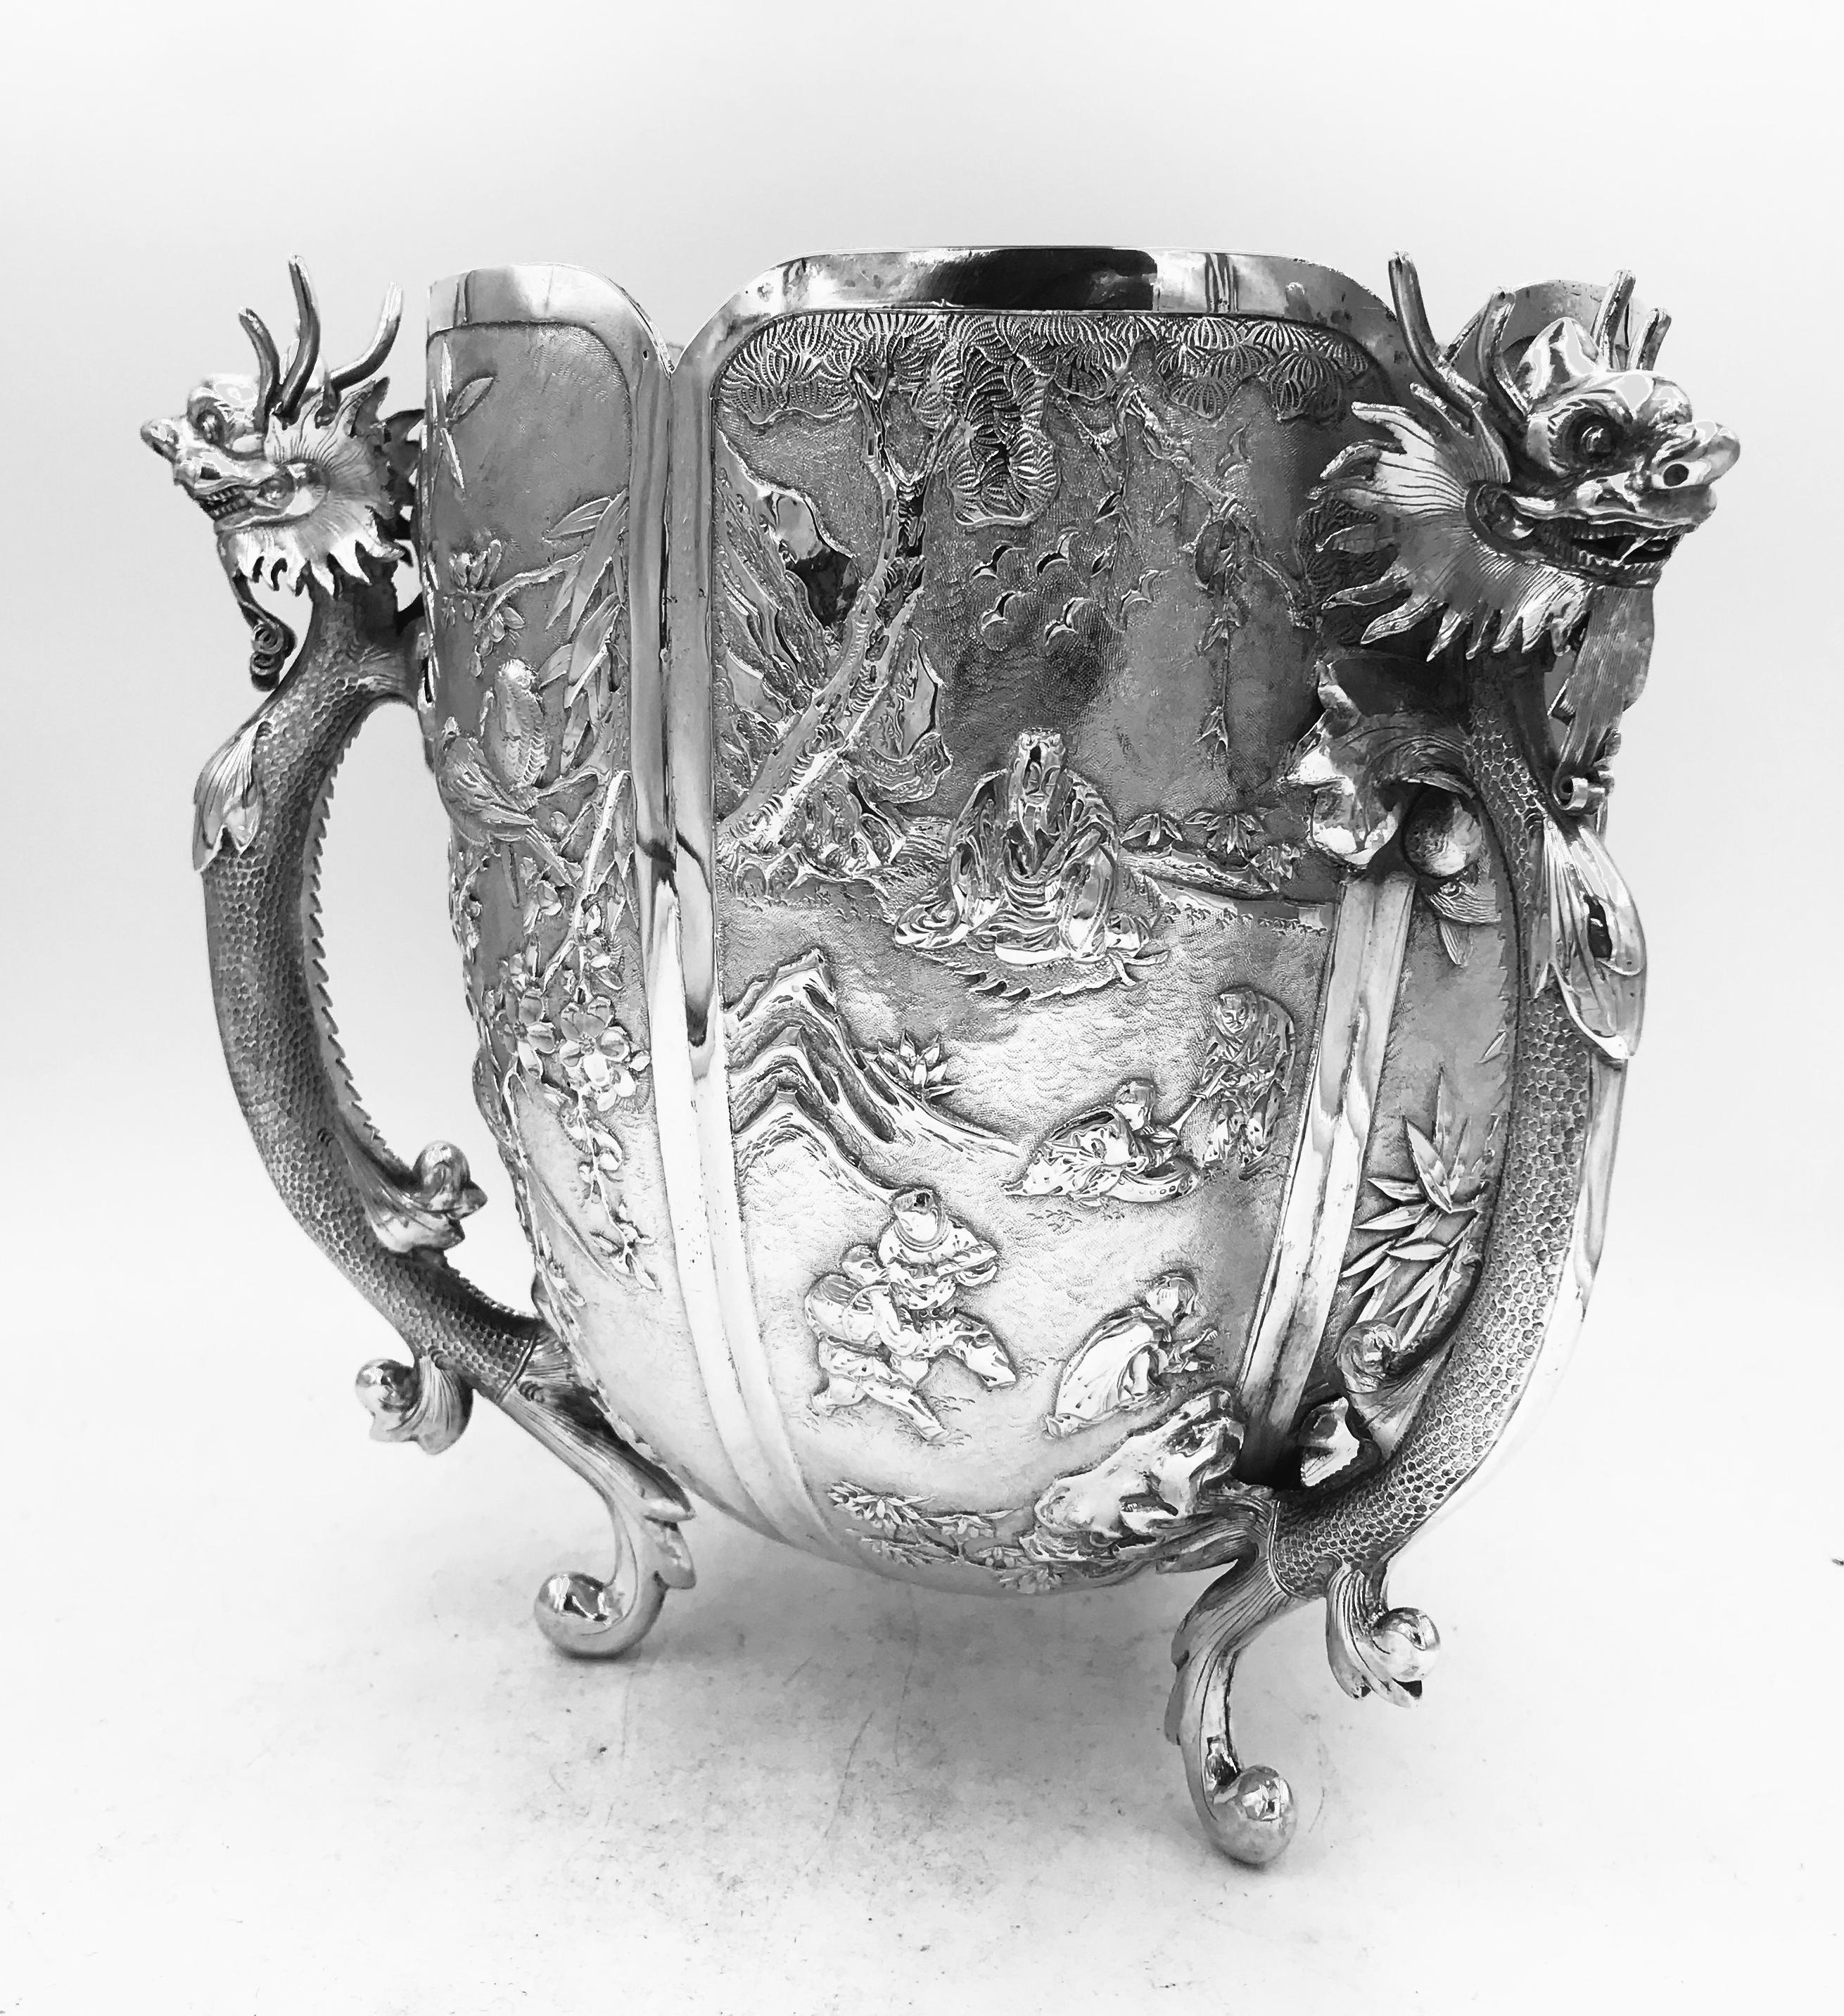 A Chinese silver bowl of variously decorated hexafoil form standing on three dragon supports. The bowl, which weighs 915gm, was sold by the well known and influential firm of Wang Hing circa 1885. Wang Hing had premises in Canton, Shanghai, and Hong